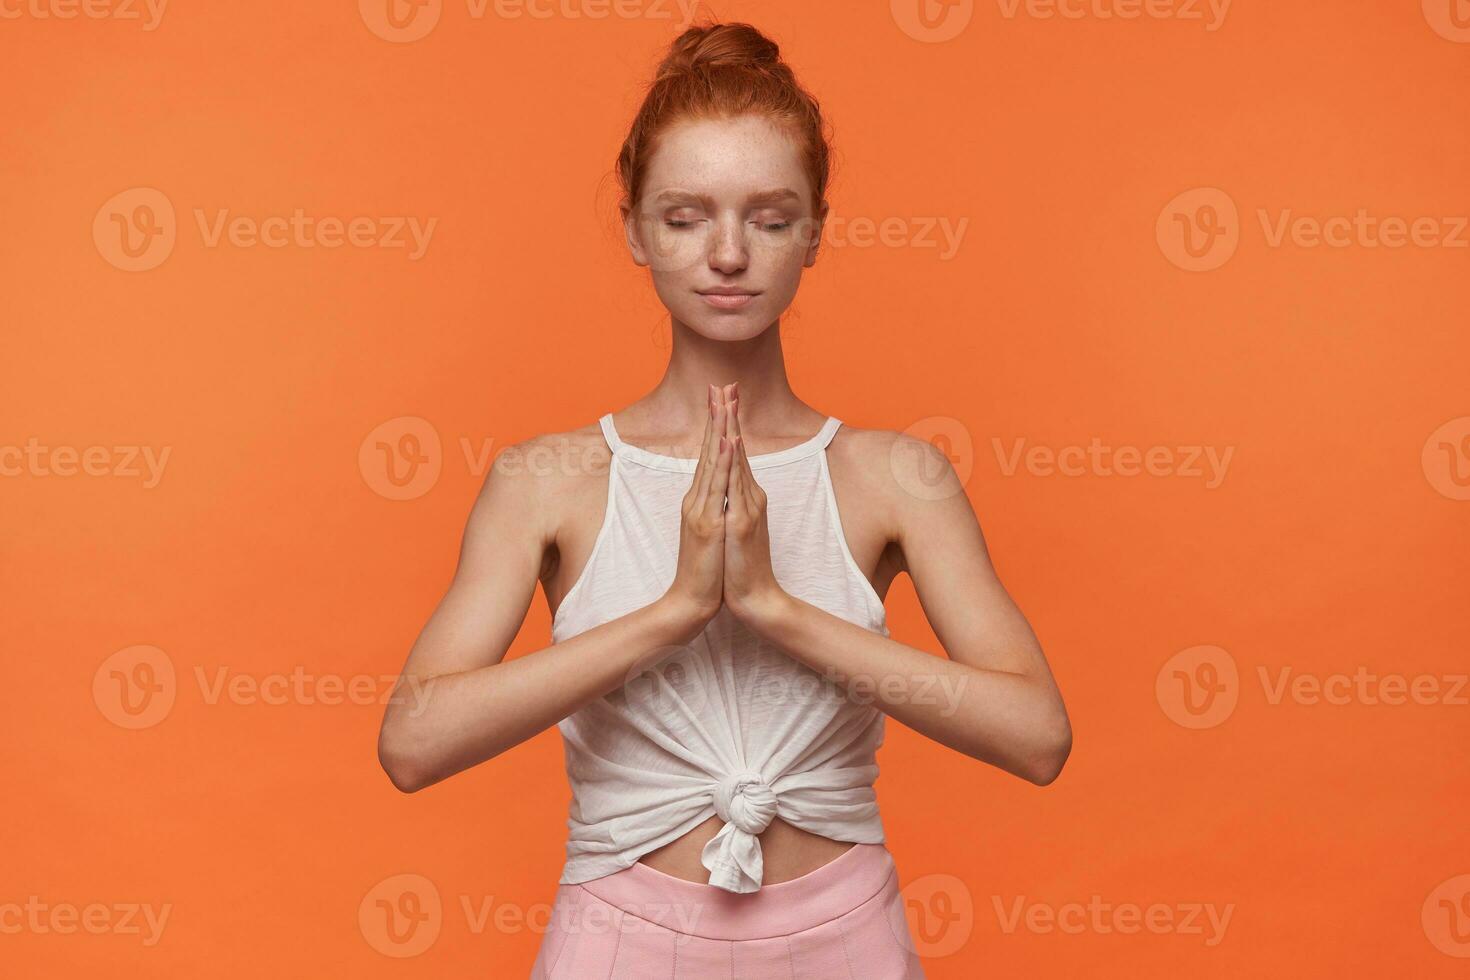 Studio photo of lovely young redhead woman with bun hairstyle wearing white top and pink skirt, raising hands with folded palms in namaste gesture, meditating with closed eyes over orange background